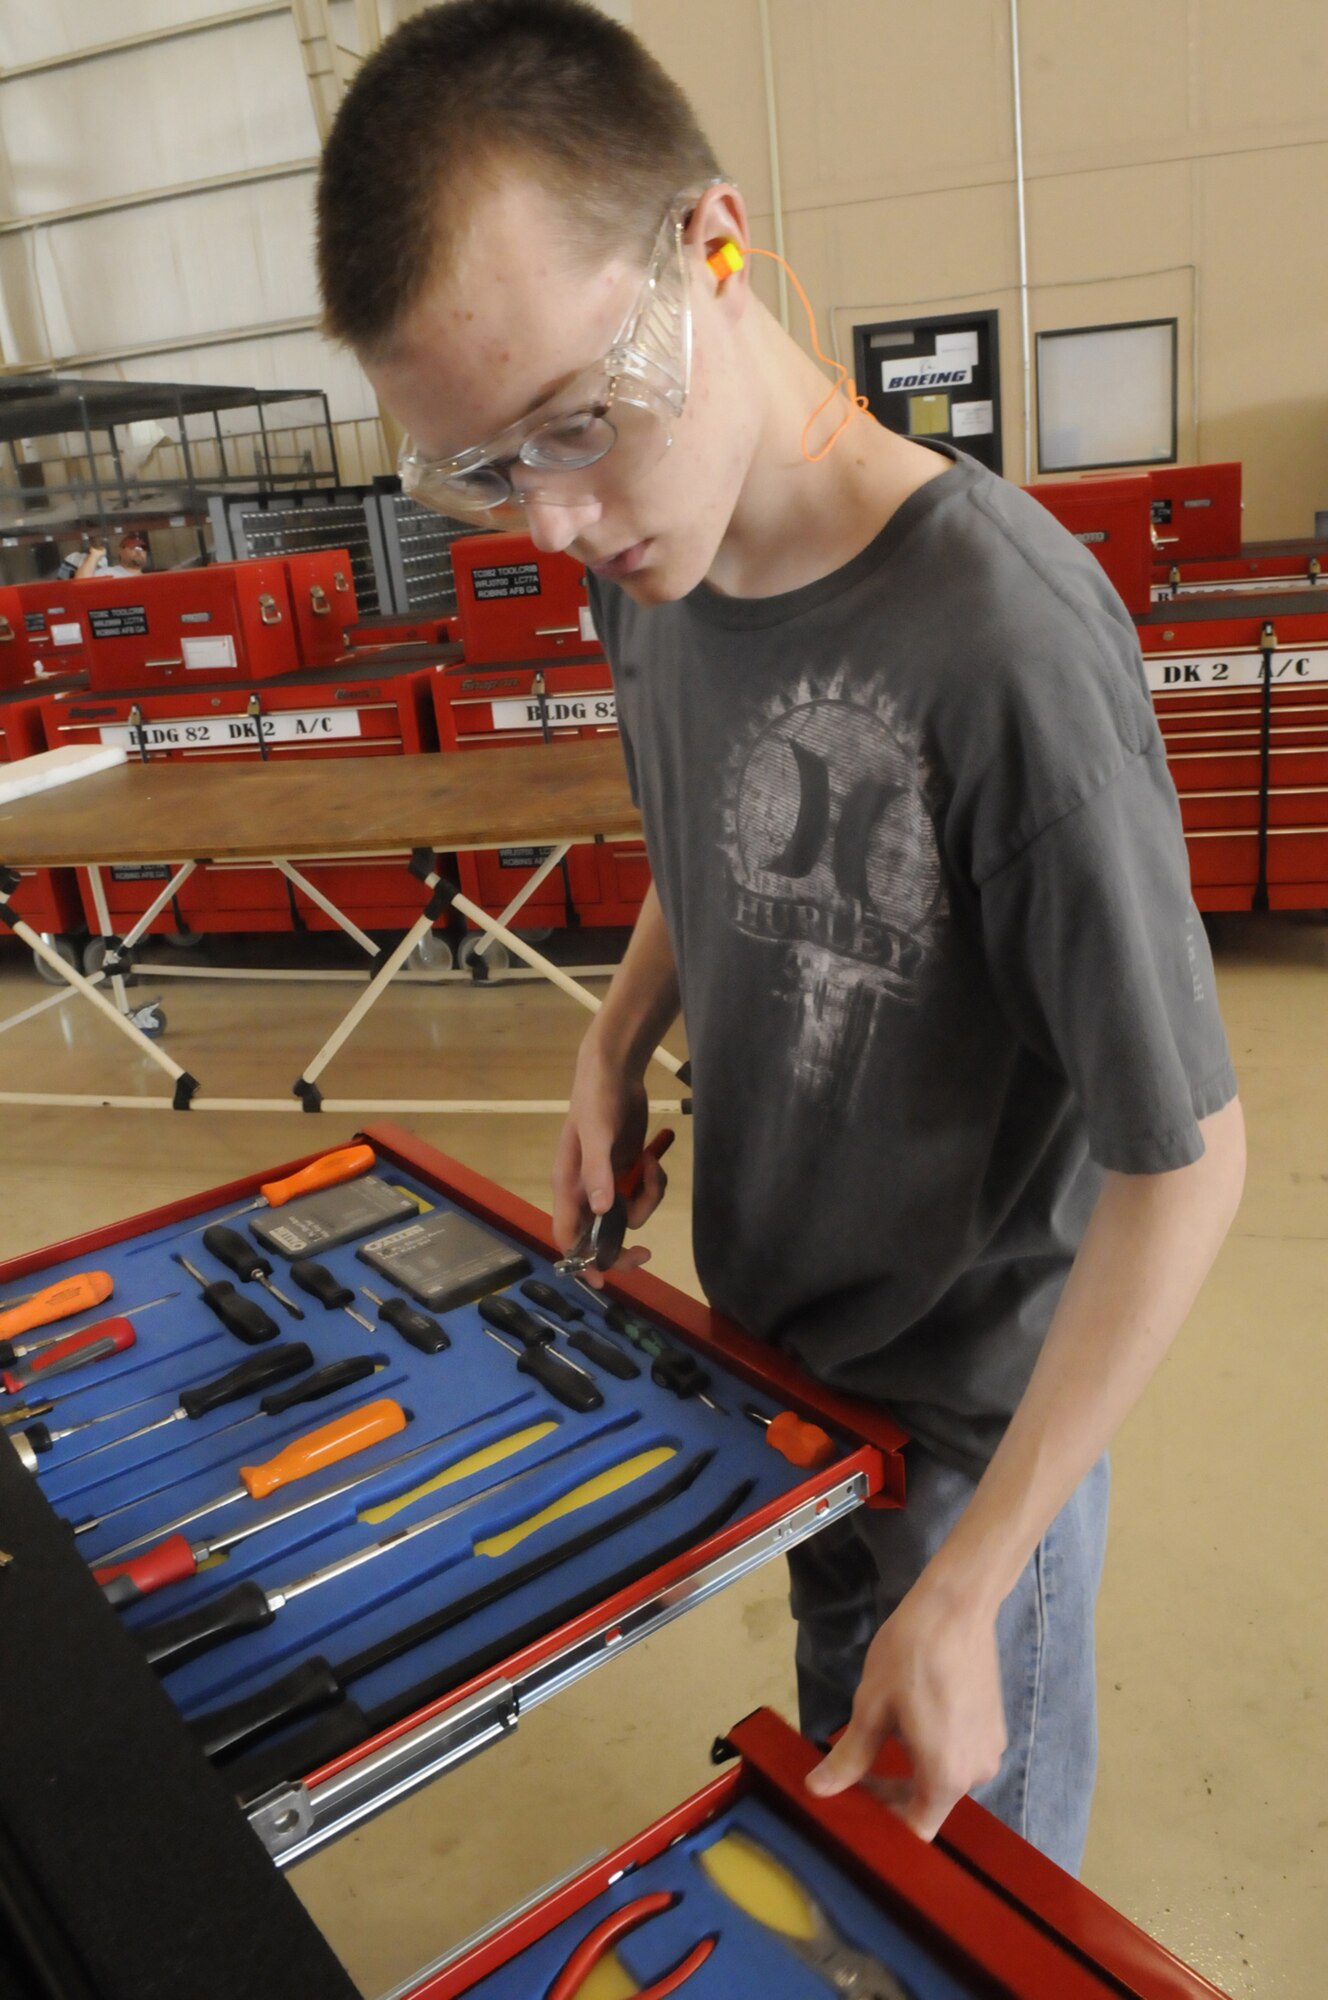 Brian O'Gorman, Warner Robins High School senior, returns tools to their places in a tool crib. The YAP students are taught proper tool control. U. S. Air Force photo by Sue Sapp